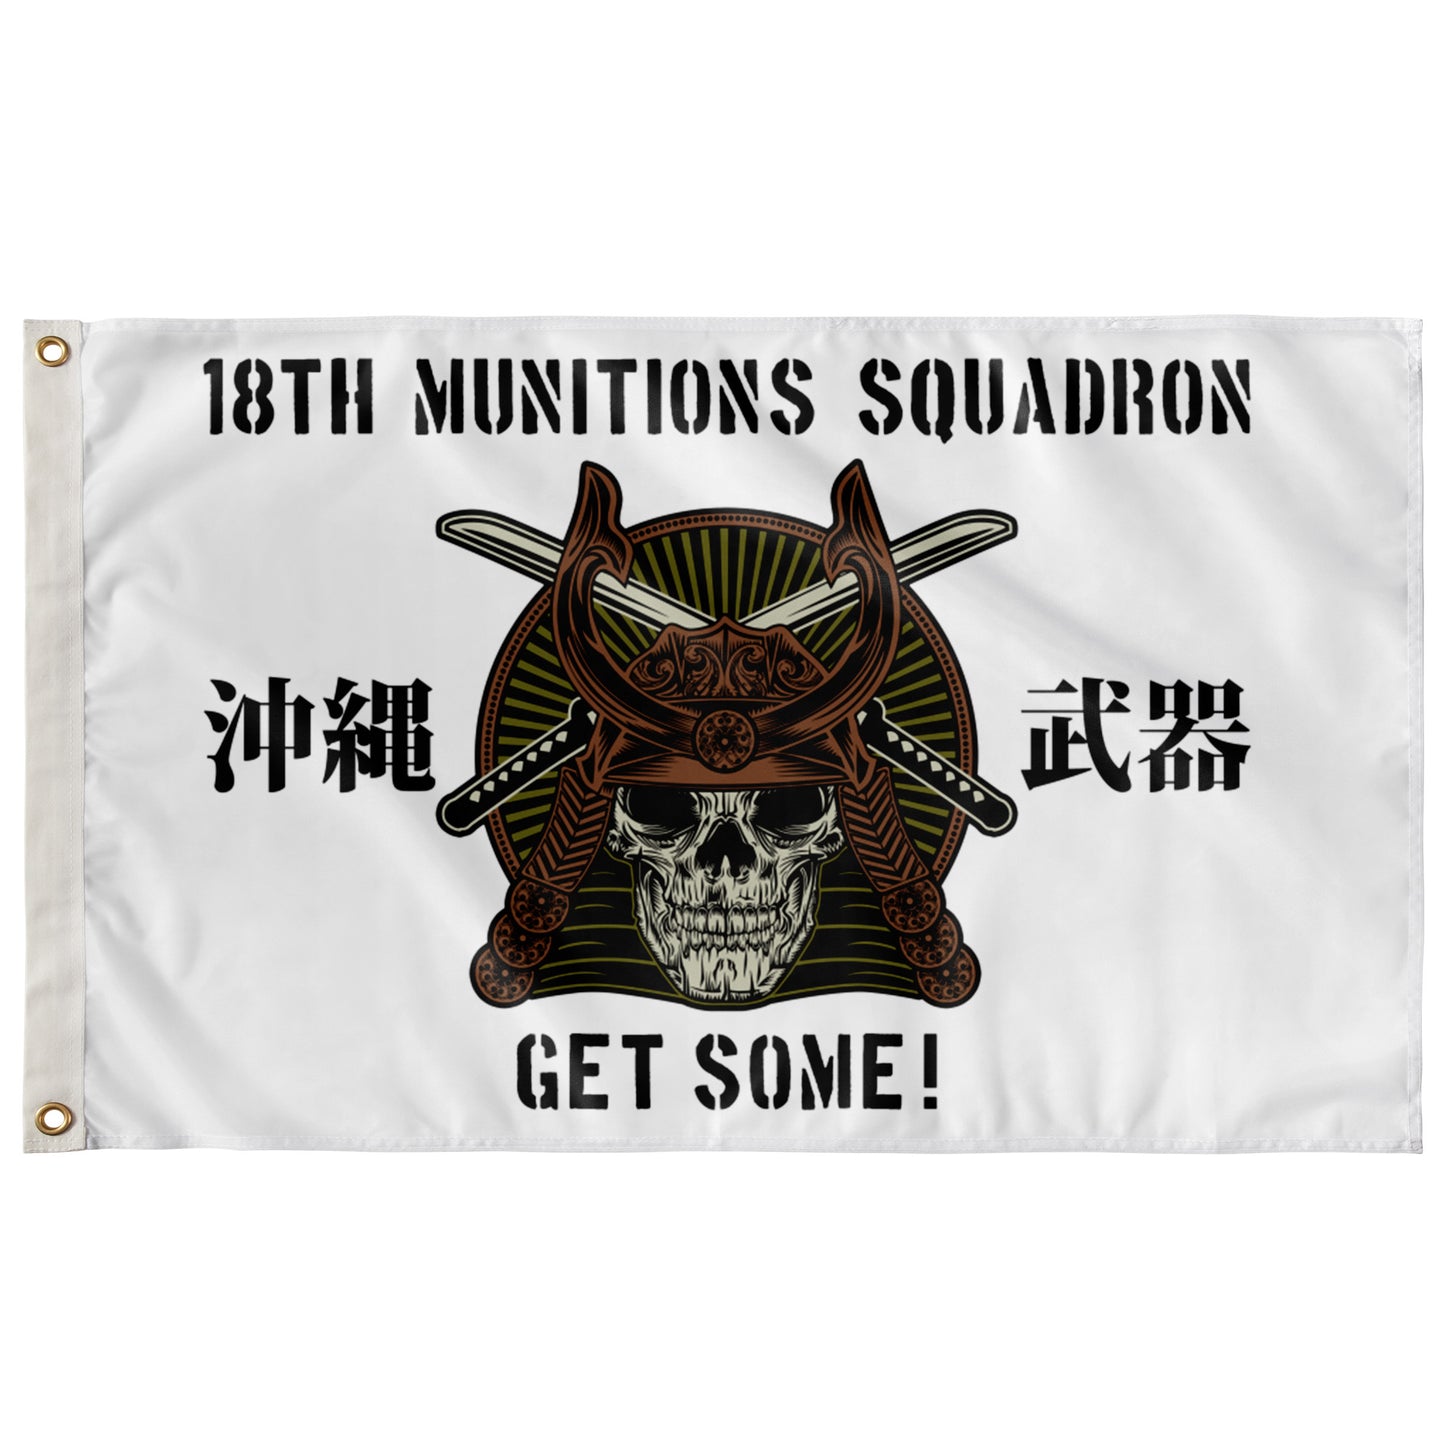 18 MUNS Weapons Only Alternate Version Updated 5' X 3' Wall Flag